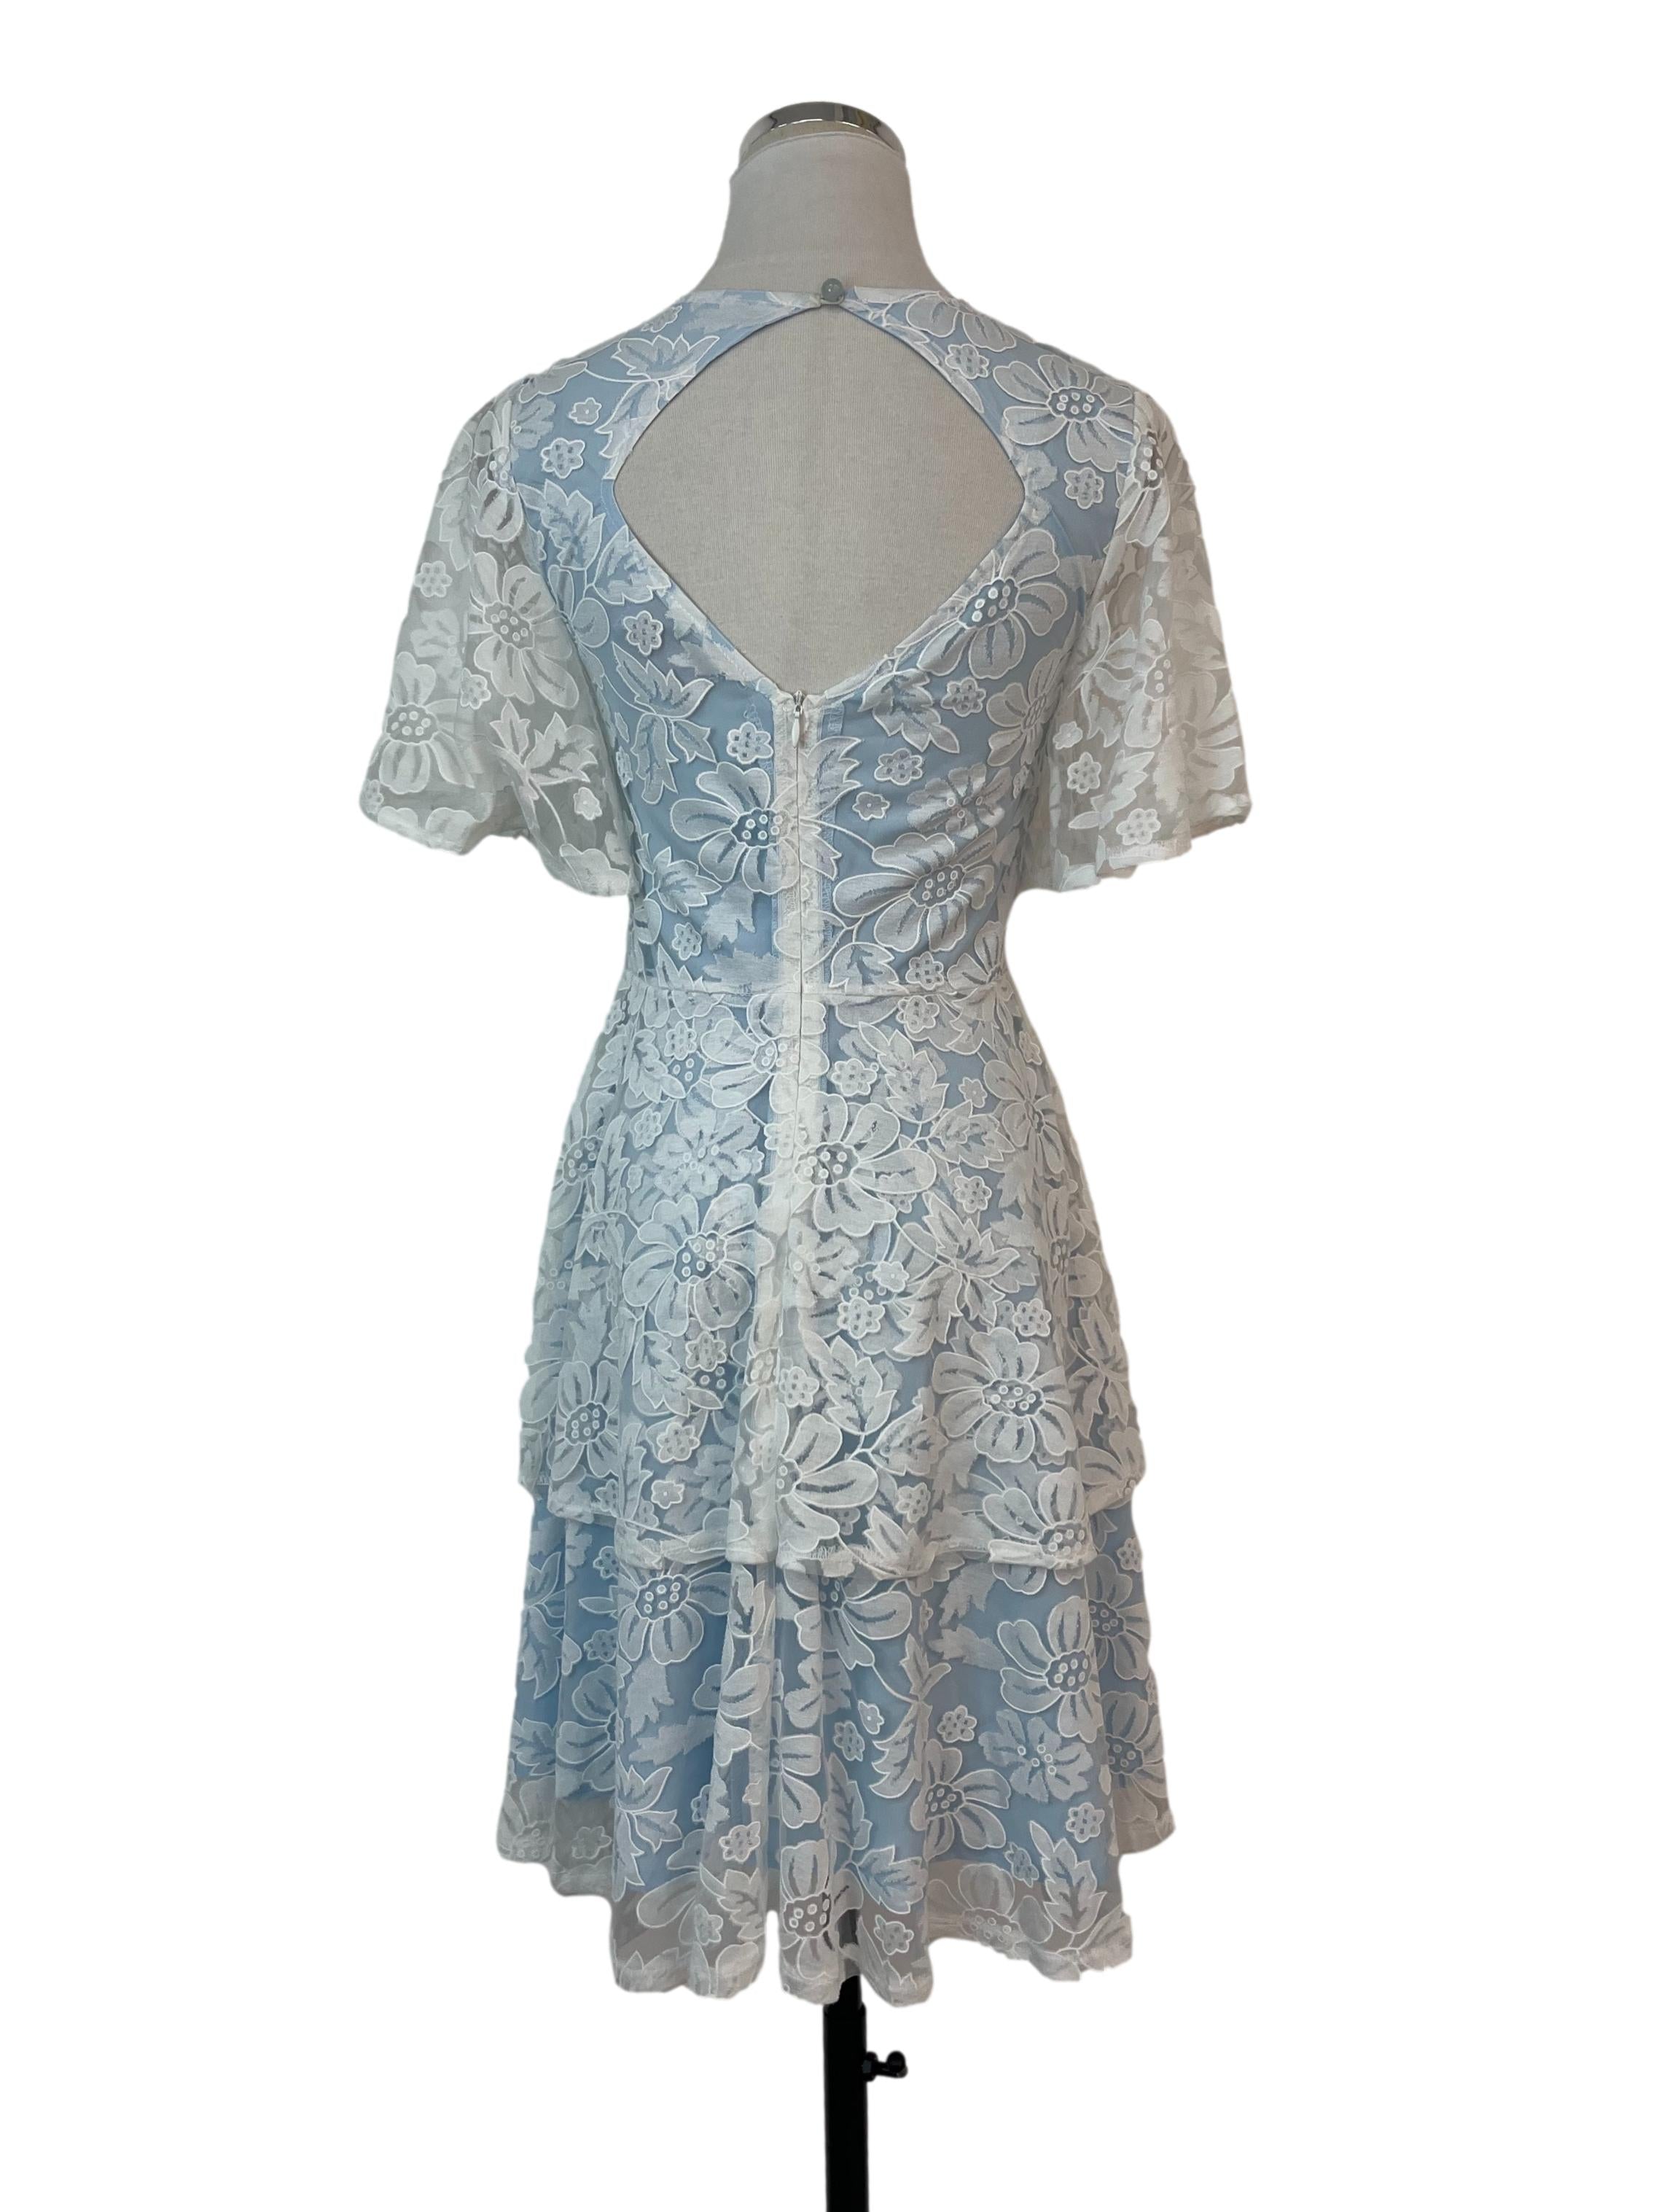 White Floral Round Neck Dress with Light Blue Inner Lining